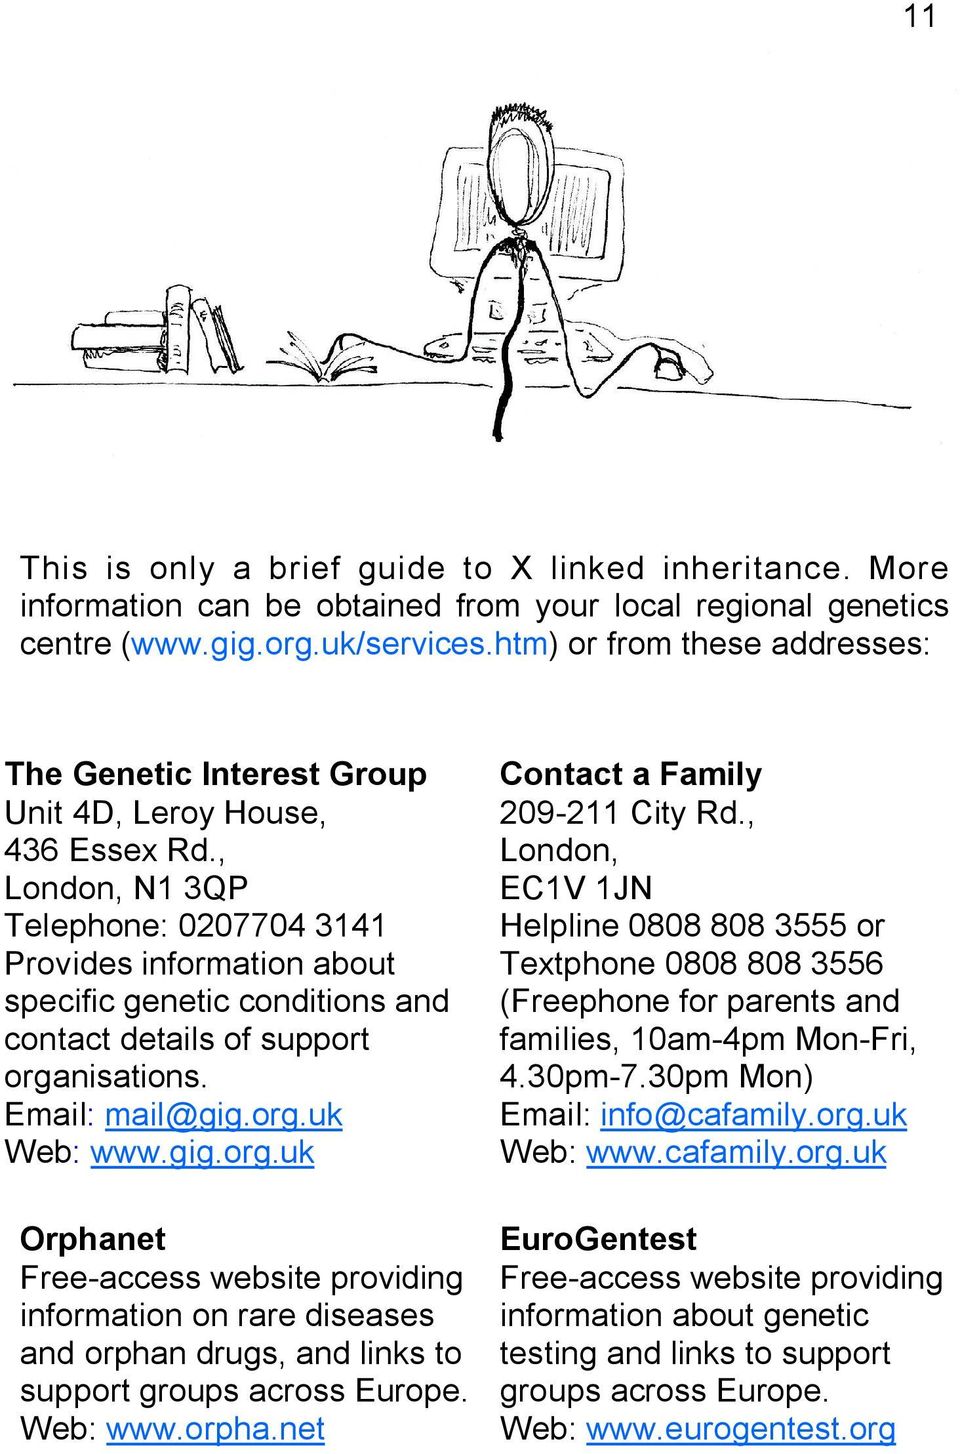 , London, N1 3QP Telephone: 0207704 3141 Provides information about specific genetic conditions and contact details of support orga